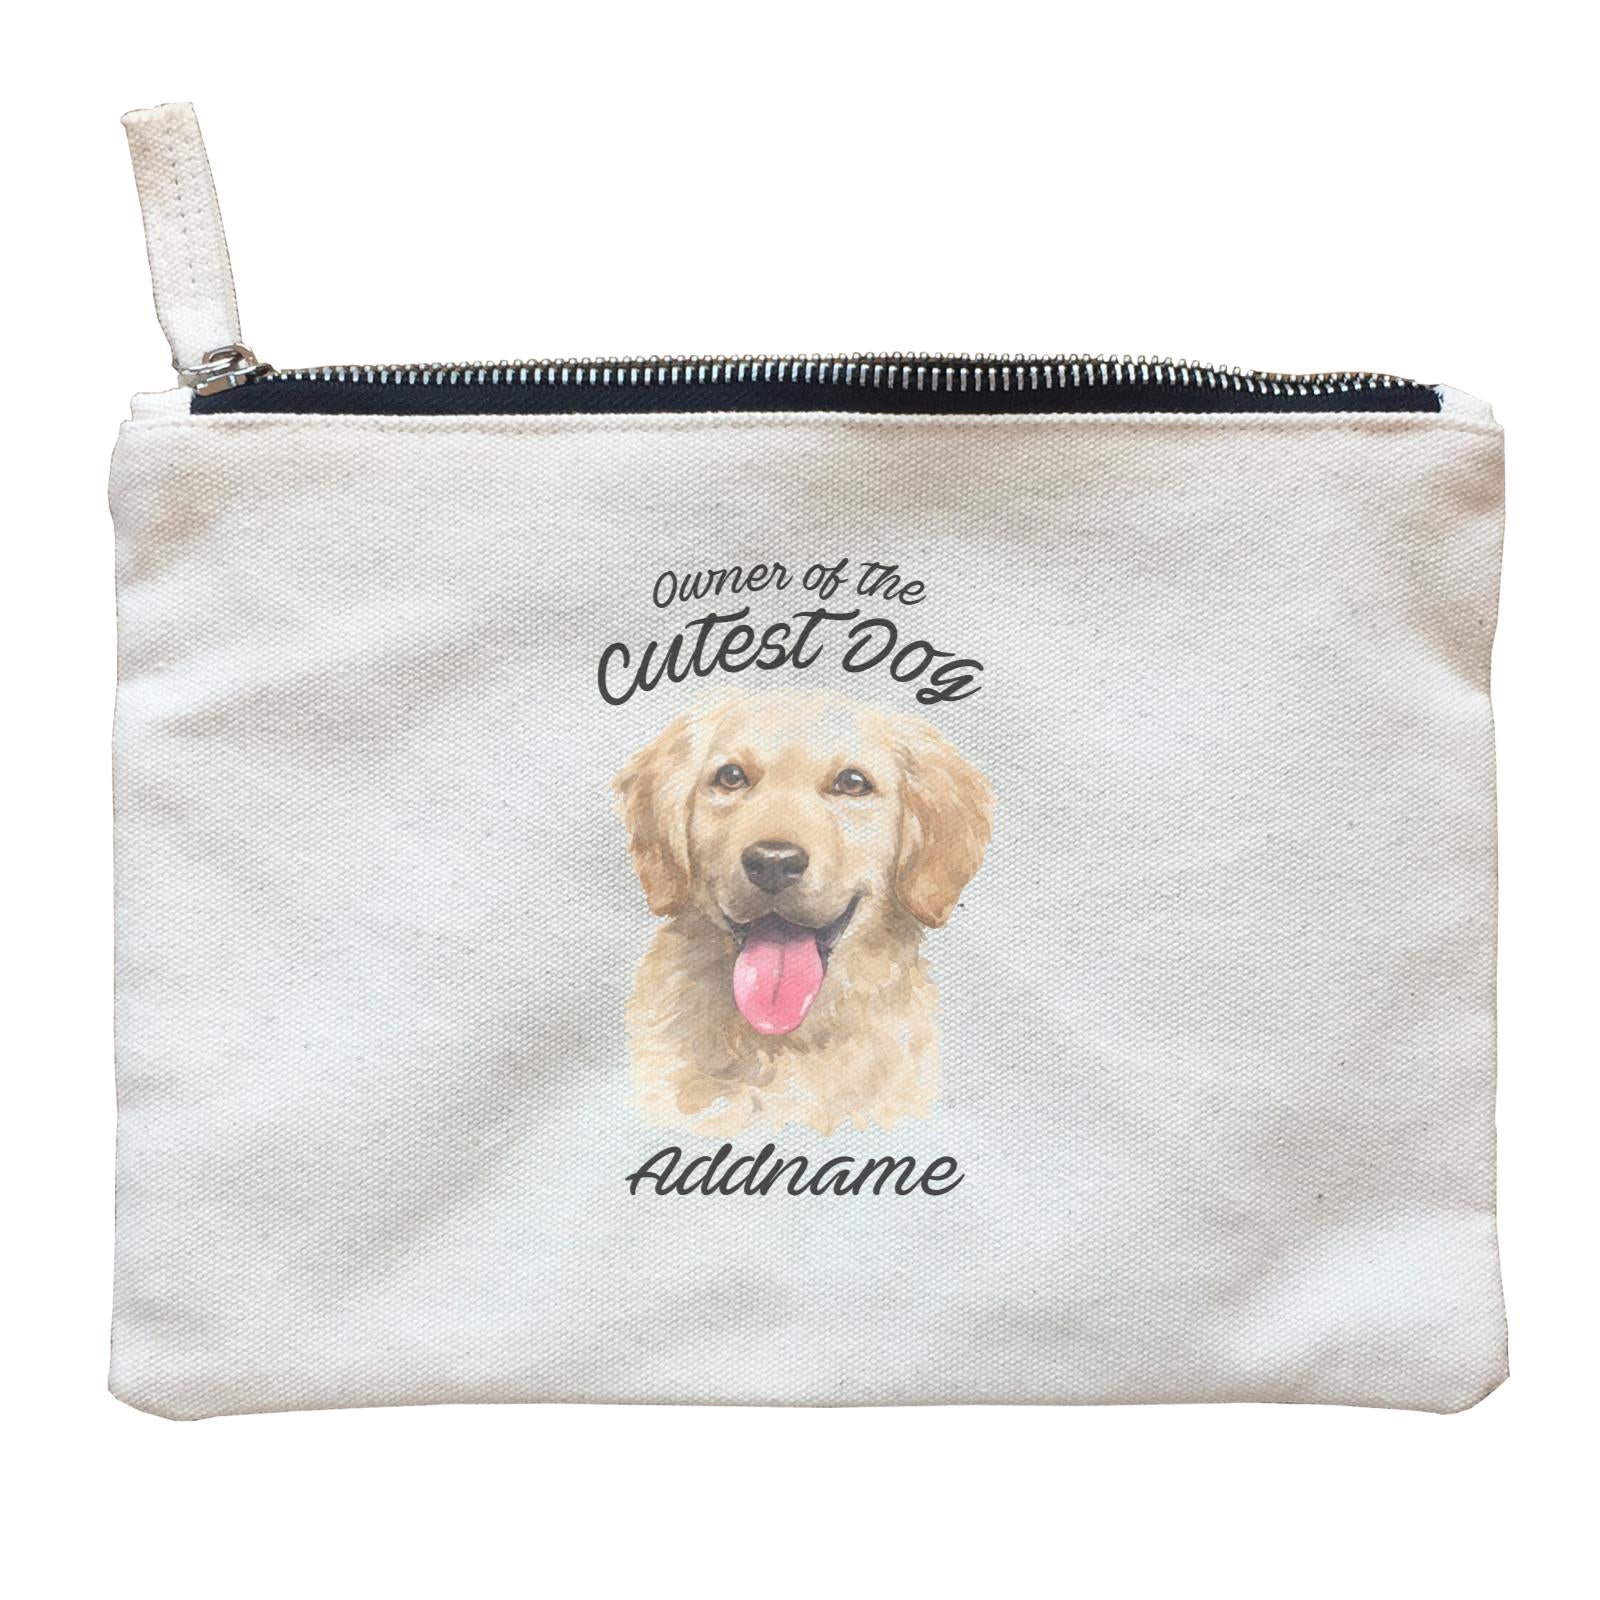 Watercolor Dog Owner Of The Cutest Dog Golden Retriever Front Addname Zipper Pouch